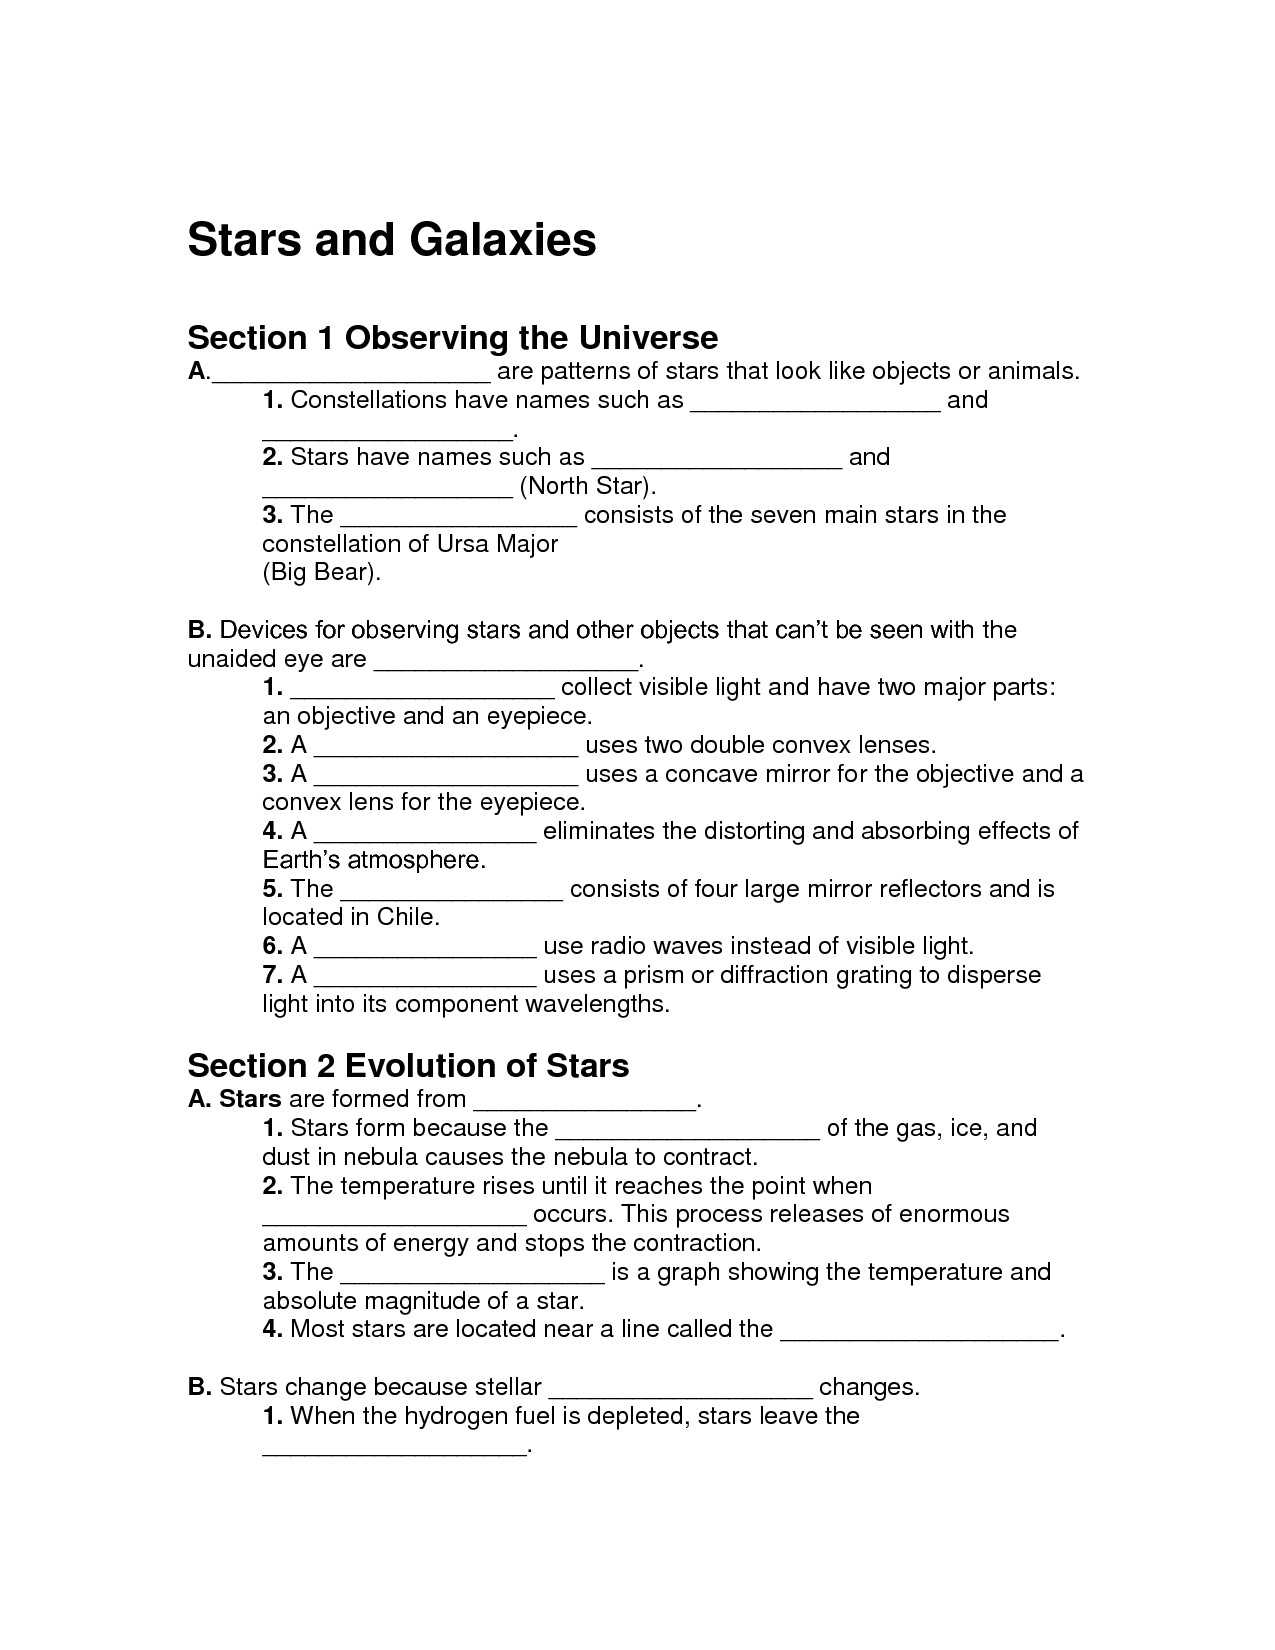 Critical Thinking Worksheets and Worksheets Templates Archives Page 18 Of 23 Parpadeo Co